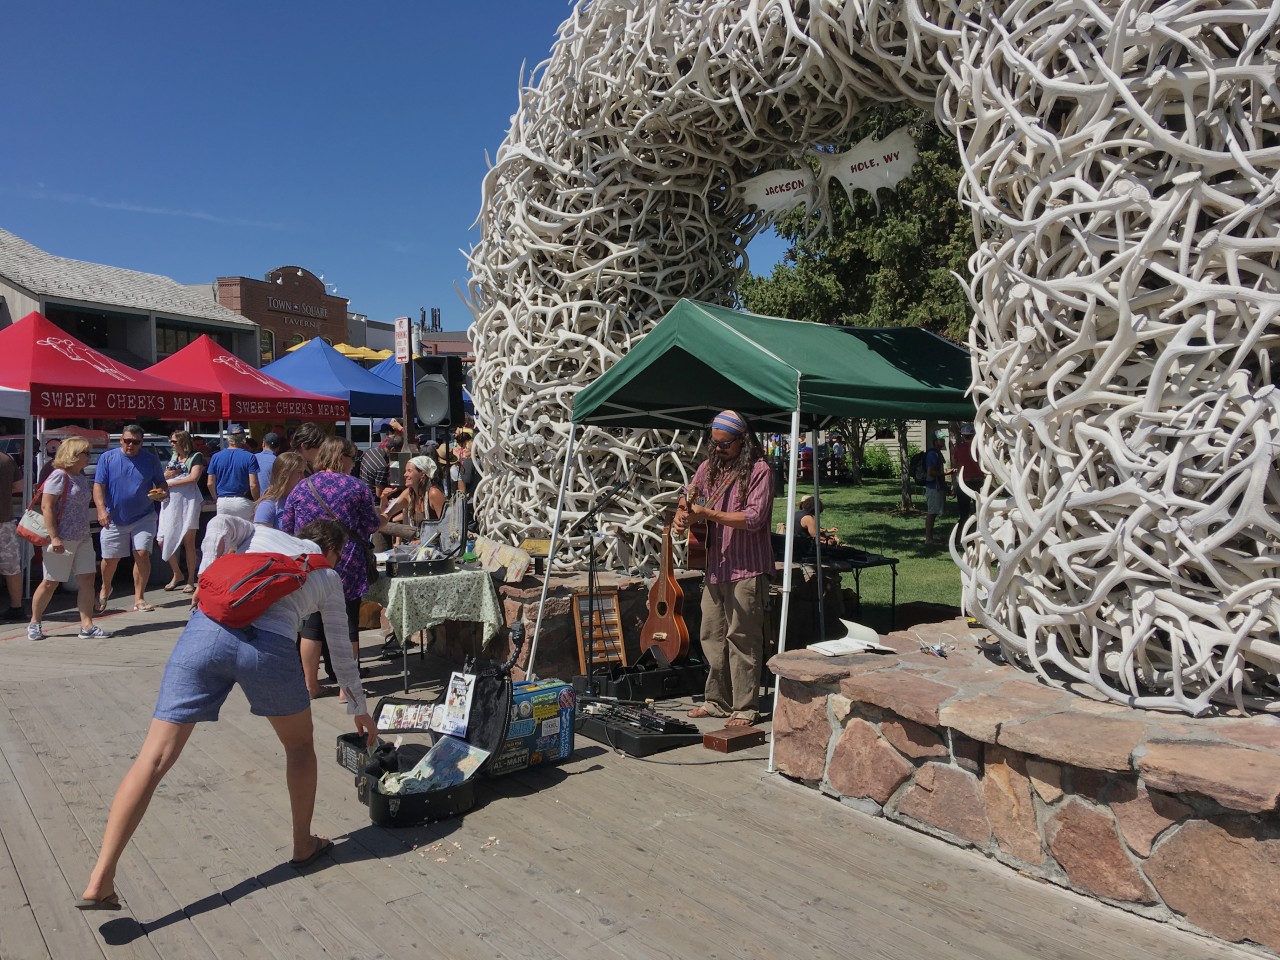 The famed elk antler arches that lead into the town's lovely, tree-shaded Town Square where locals and visitors come to relax or enjoy special events.